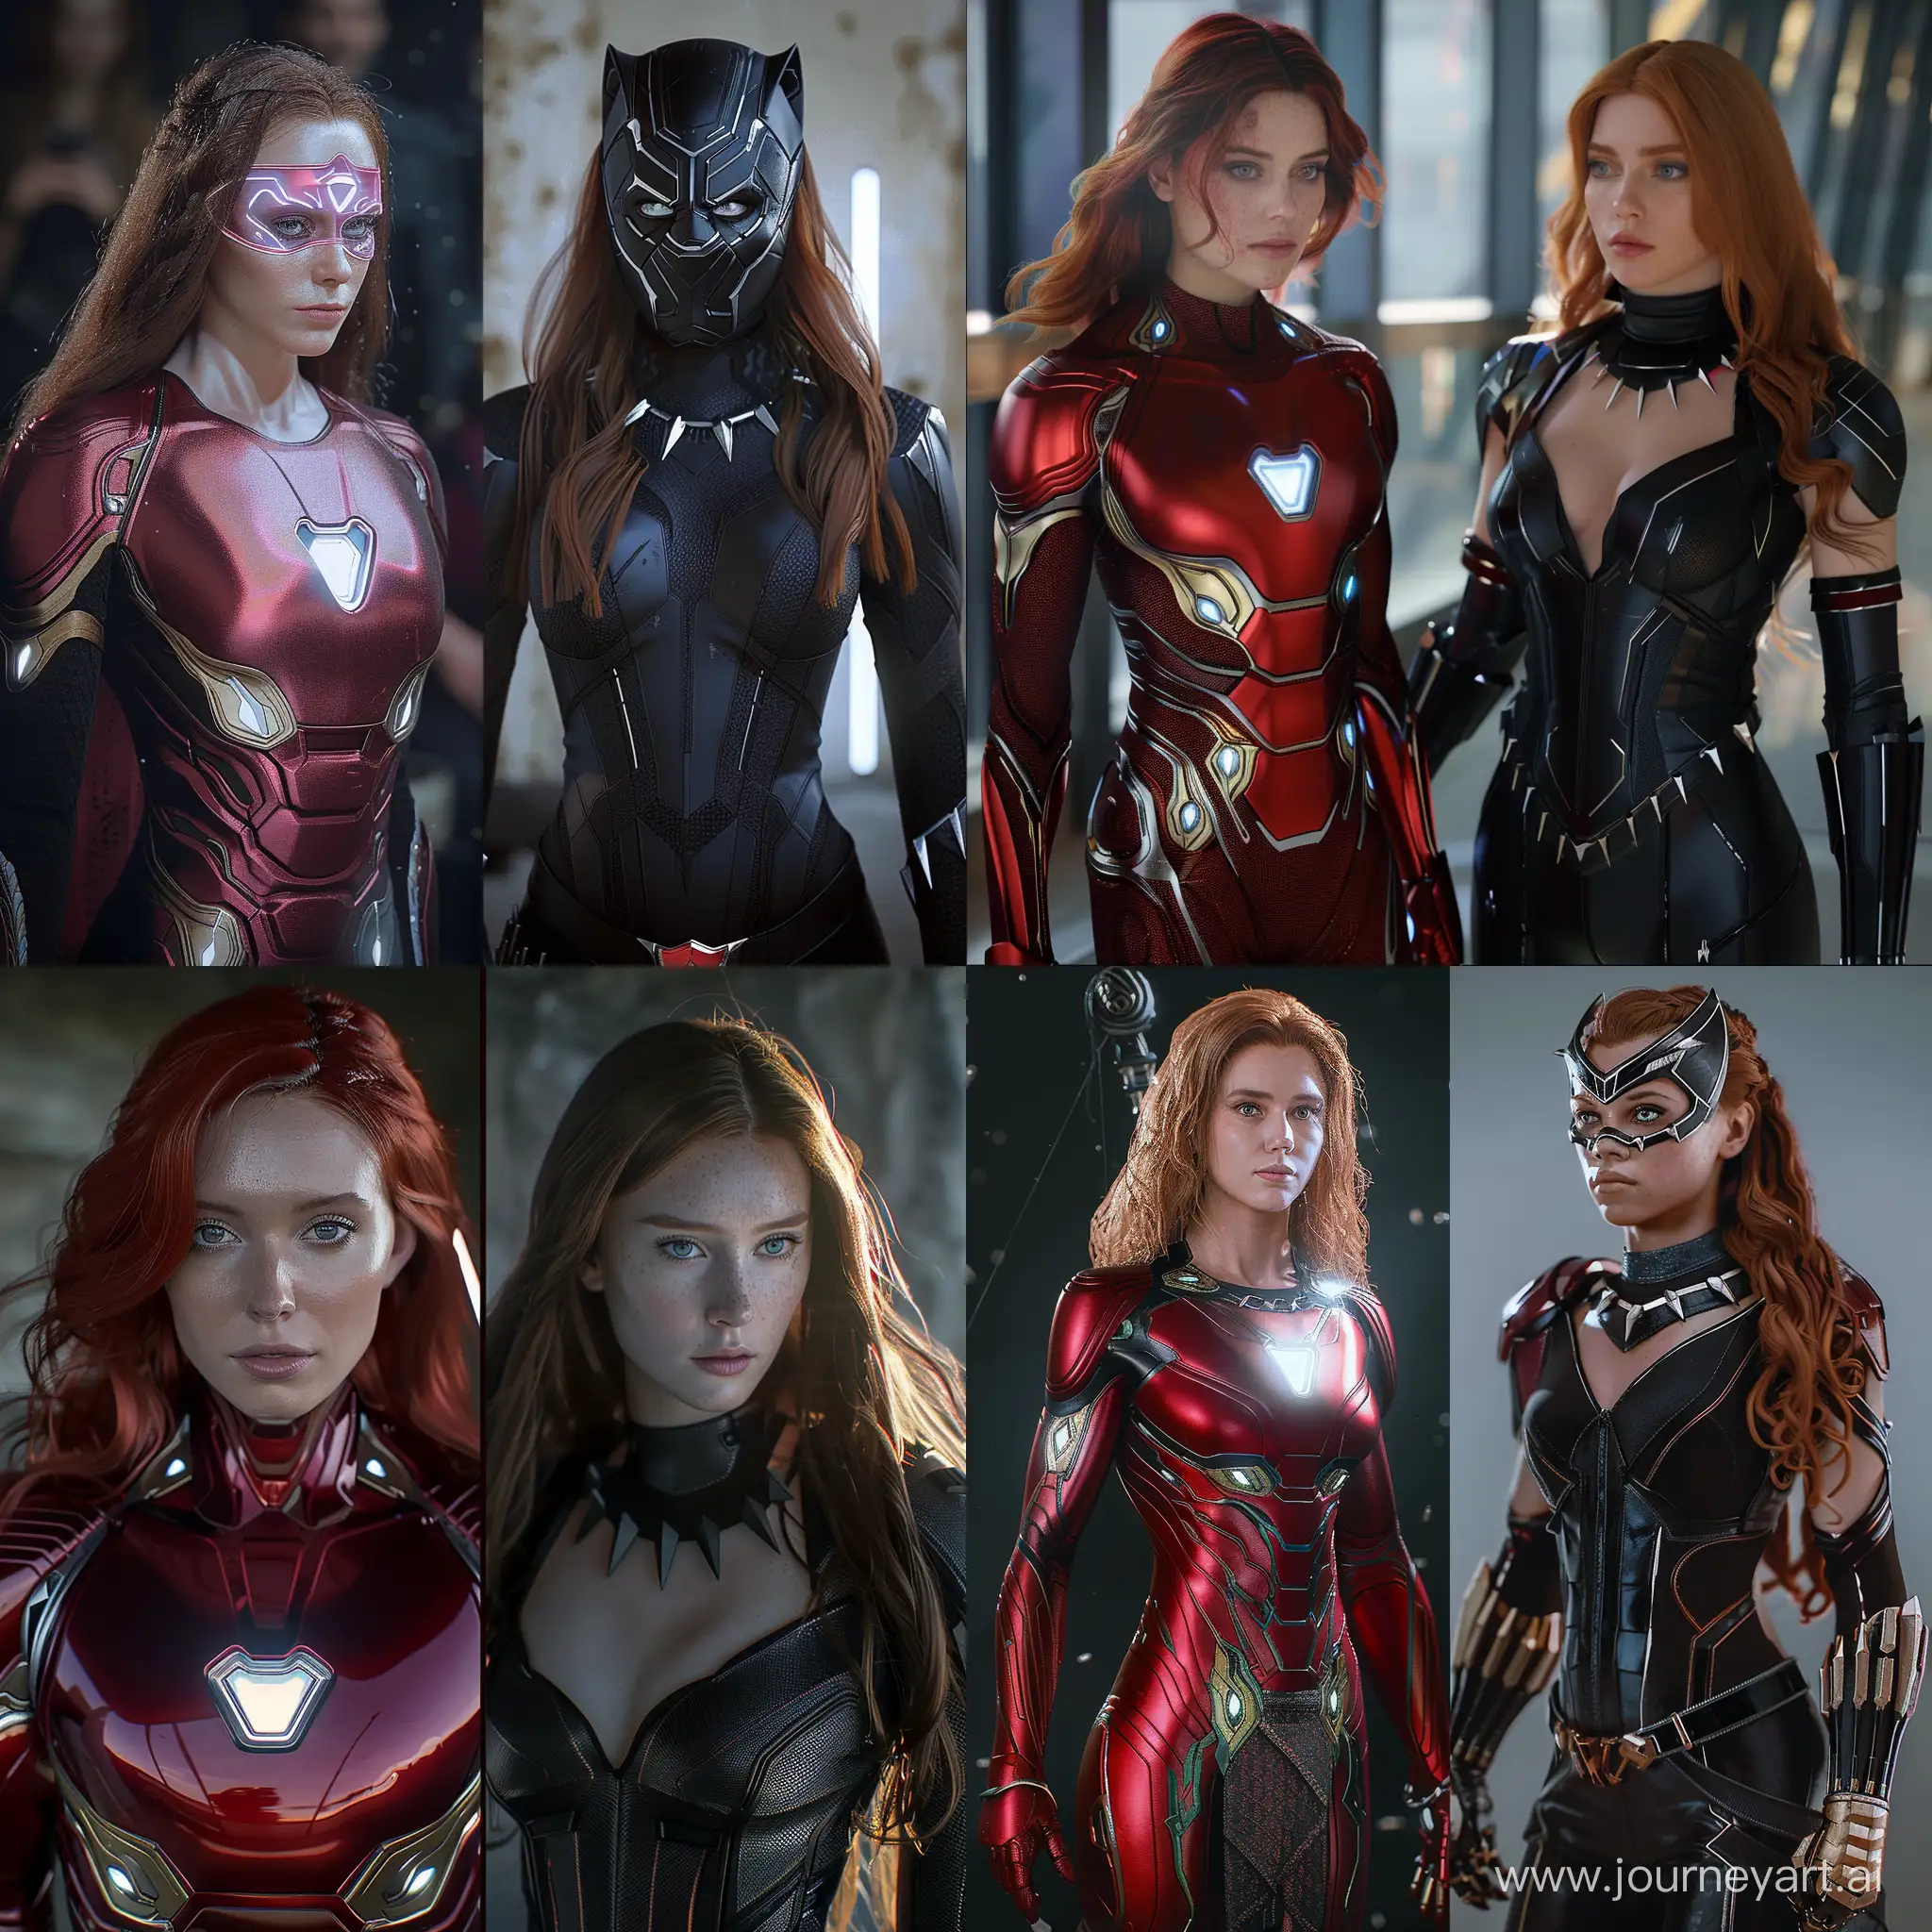 Hyperrealistic-Fusion-of-Scarlet-Witch-with-Iron-Man-and-Black-Widow-with-Black-Panther